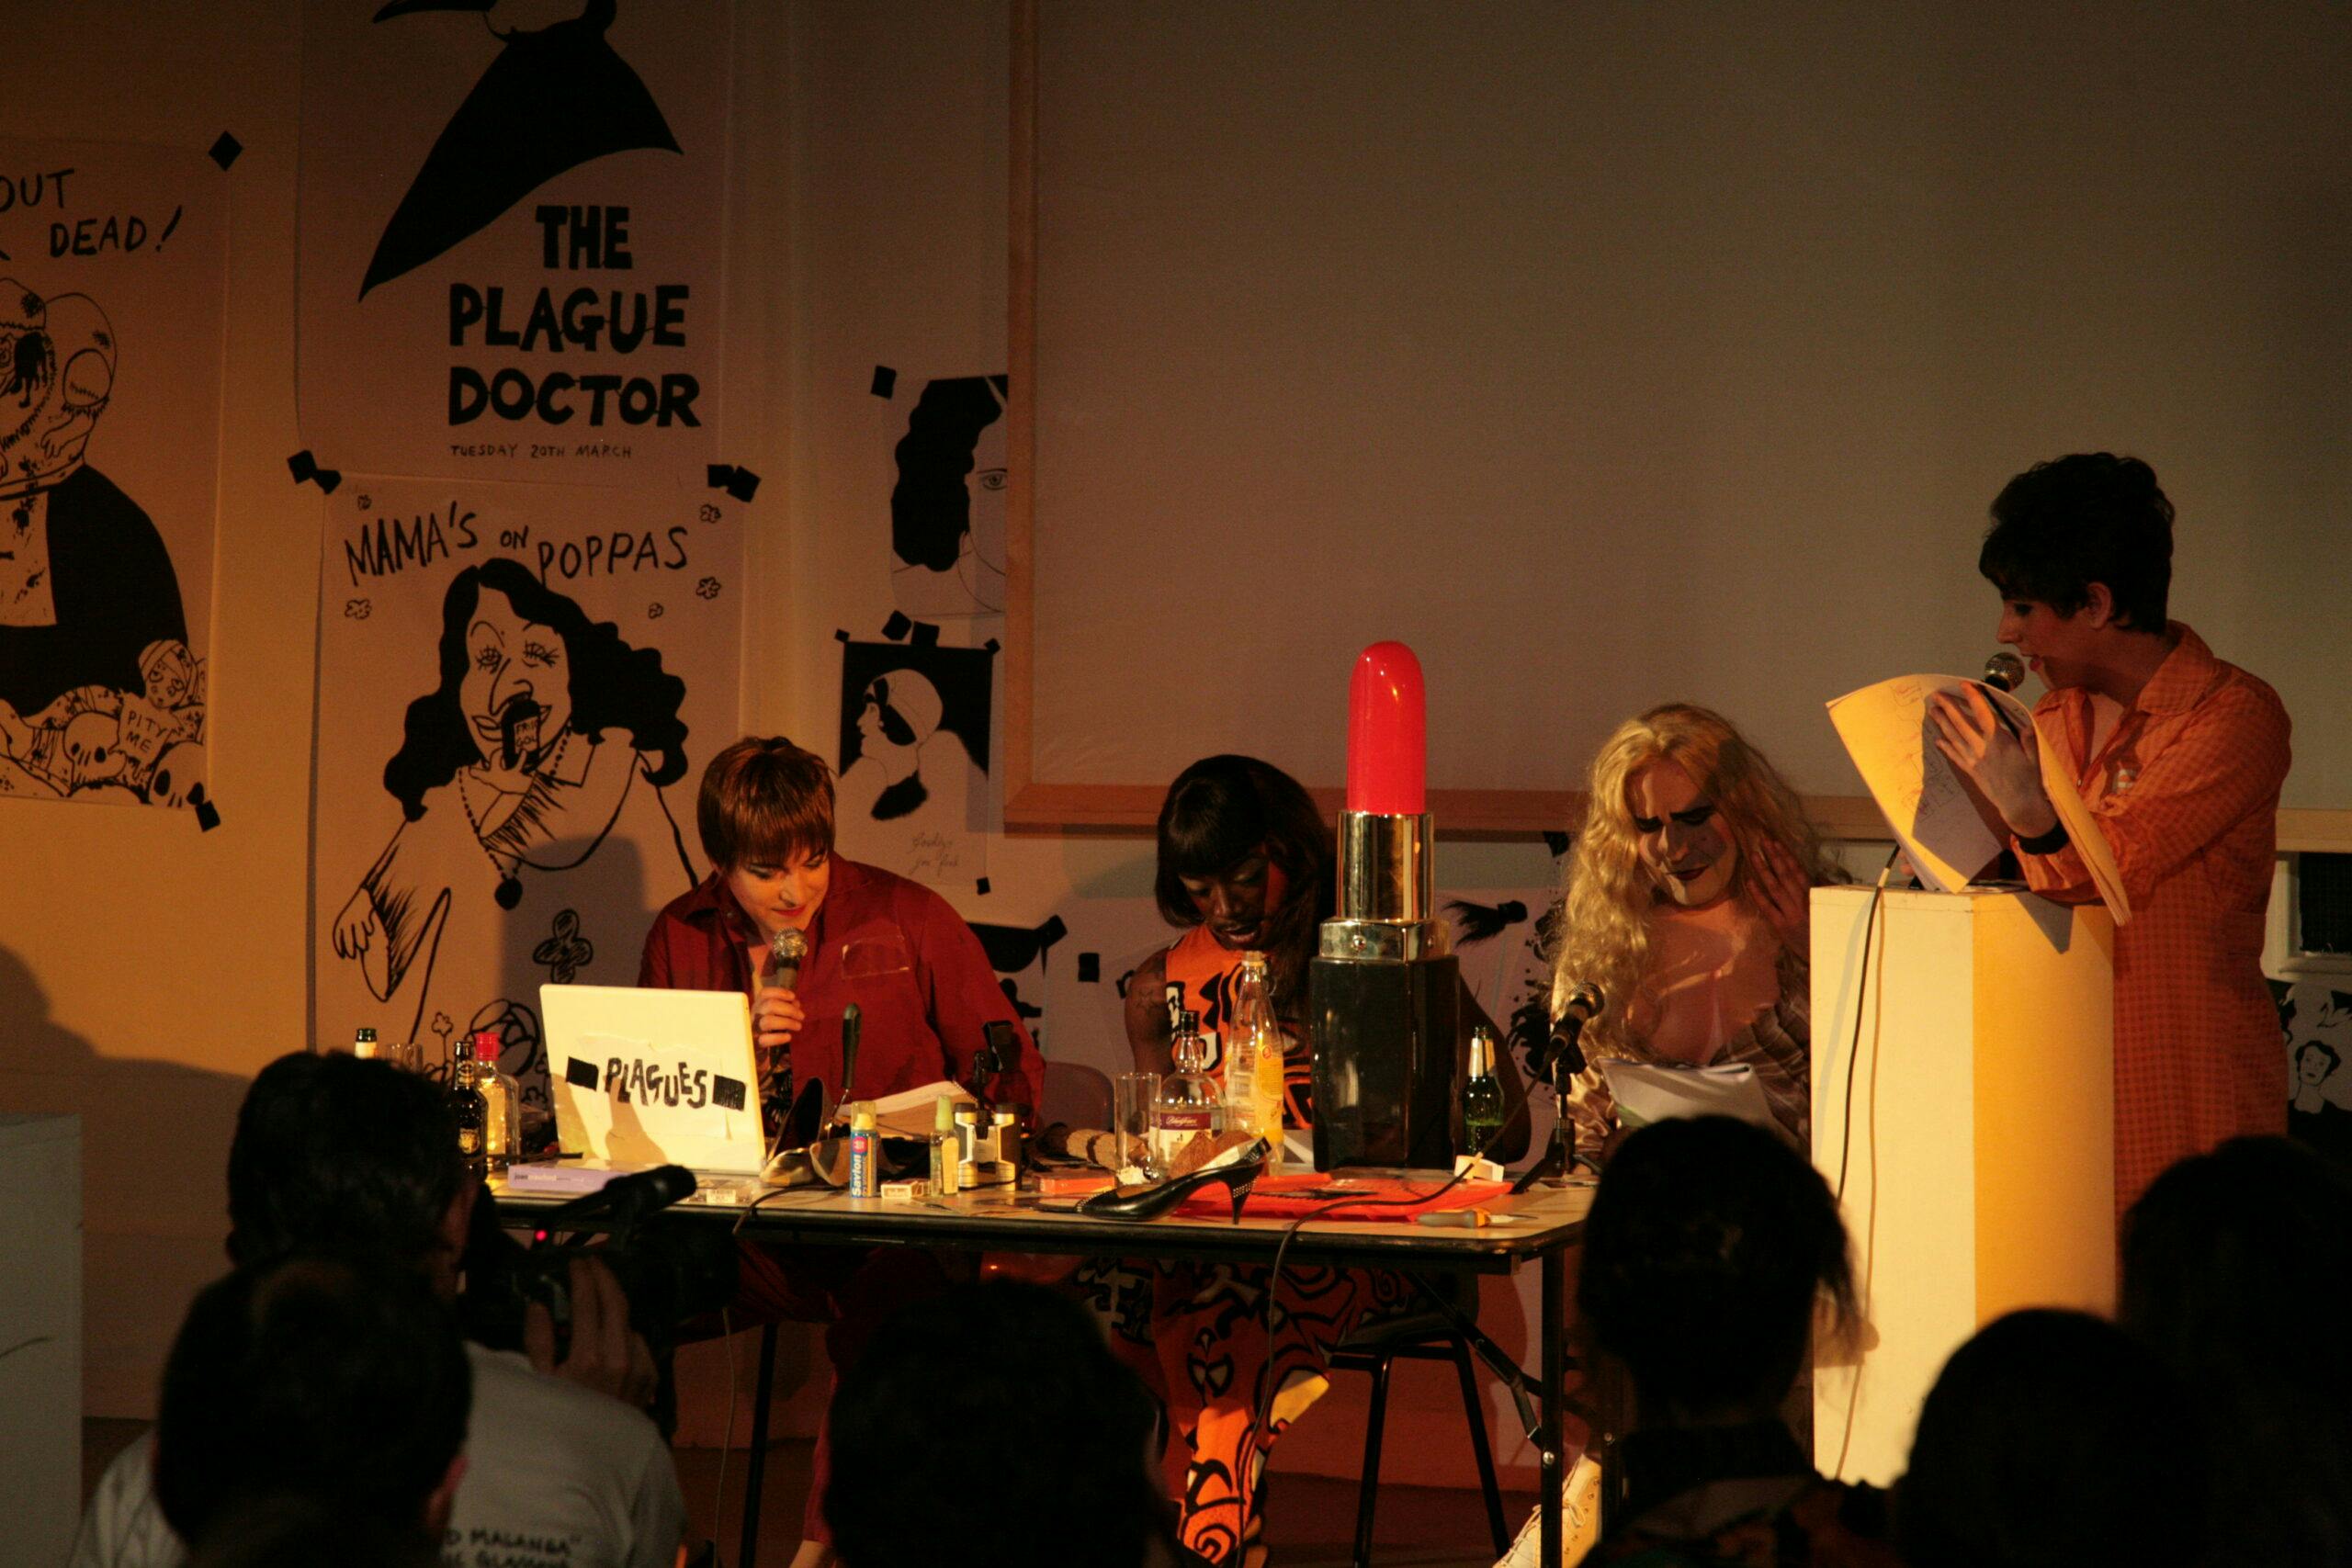 rmers sit at a table in front of an audience. The table has a giant novelty red lipstick, a high heel and a laptop. The wall in the background is plastered with black and white illustrated posters